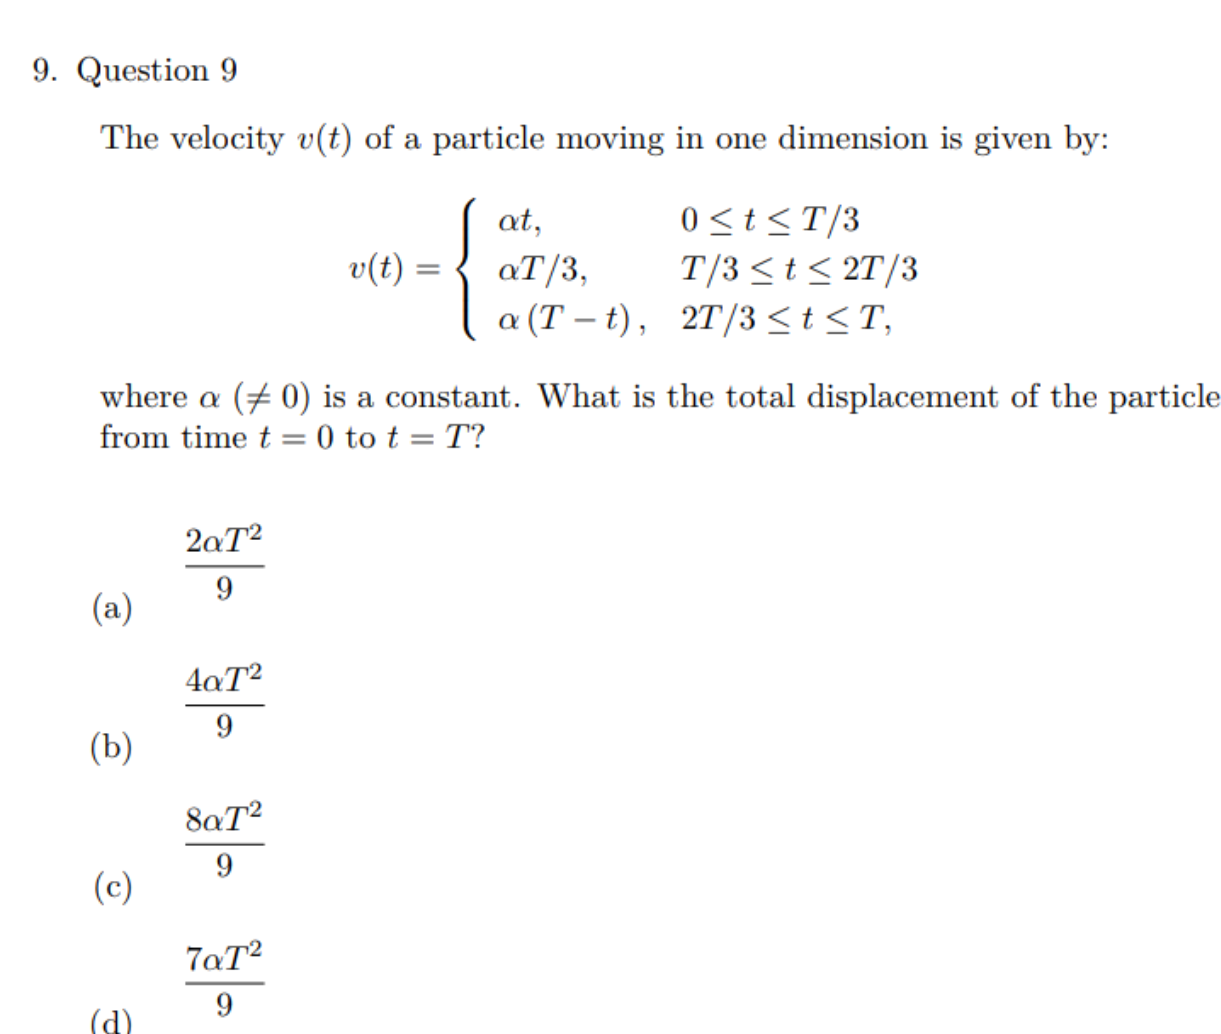 9. Question 9
The velocity v(t) of a particle moving in one dimension 